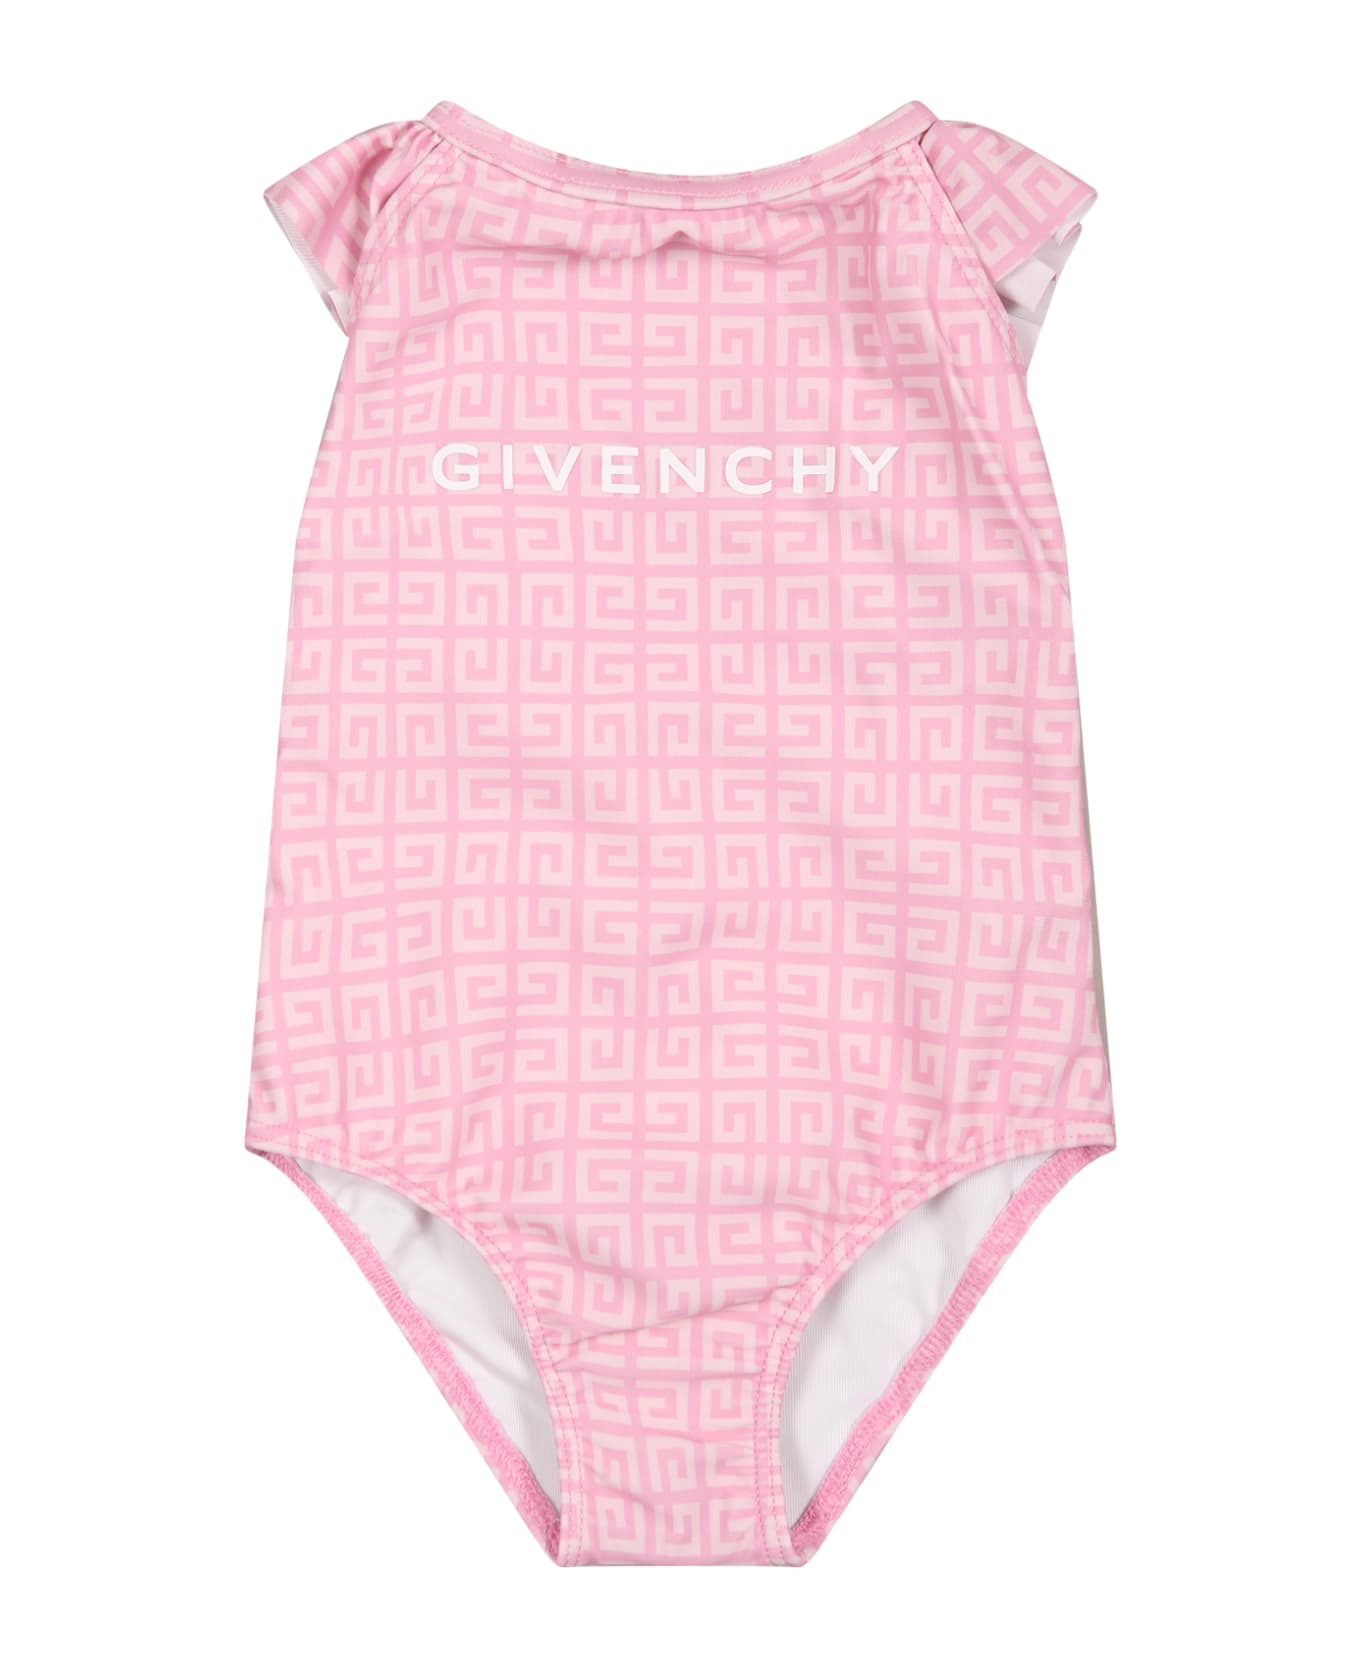 Givenchy Pink Swimsuit For Baby Girl With All-over Iconic Monogram - Pink